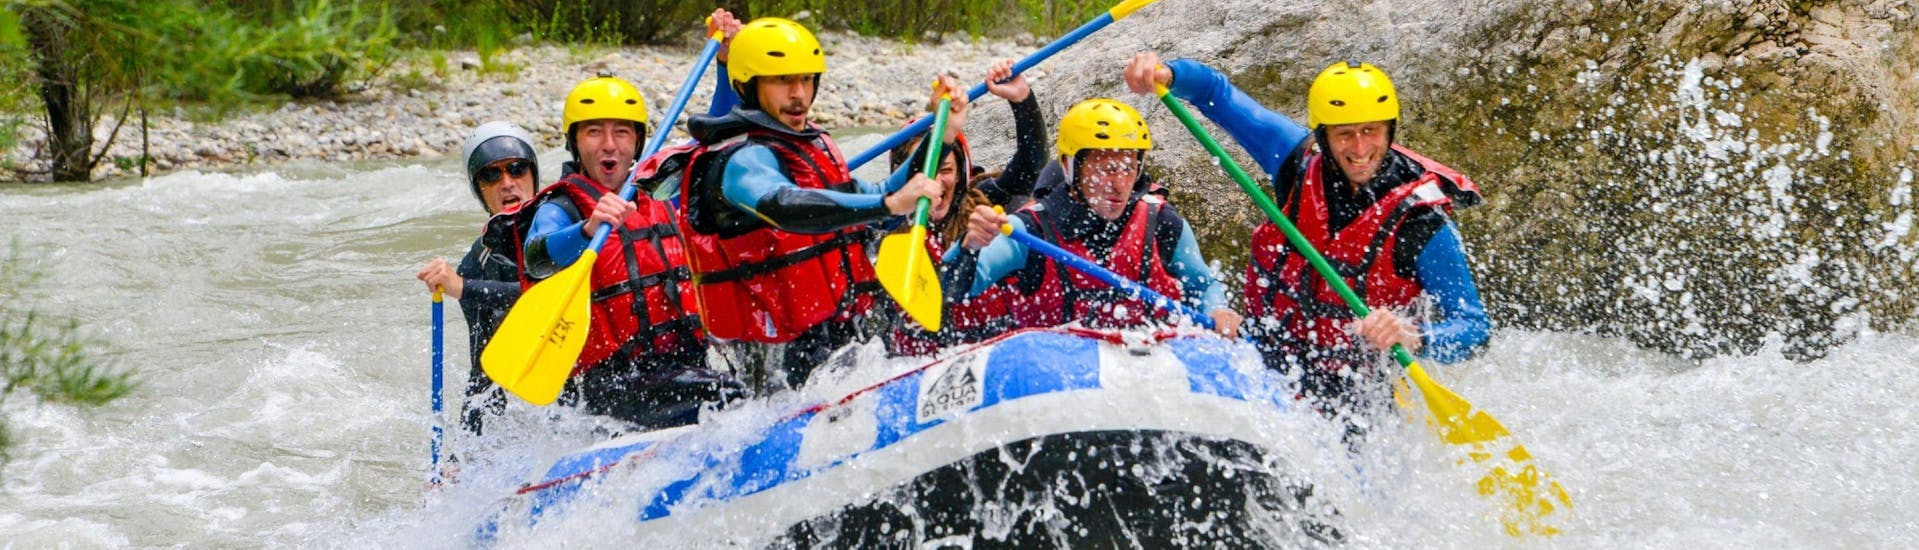 A group is caught in rapids on the Verdon river and is having fun during the Classic rafting descent organized by Yeti Rafting in low season.